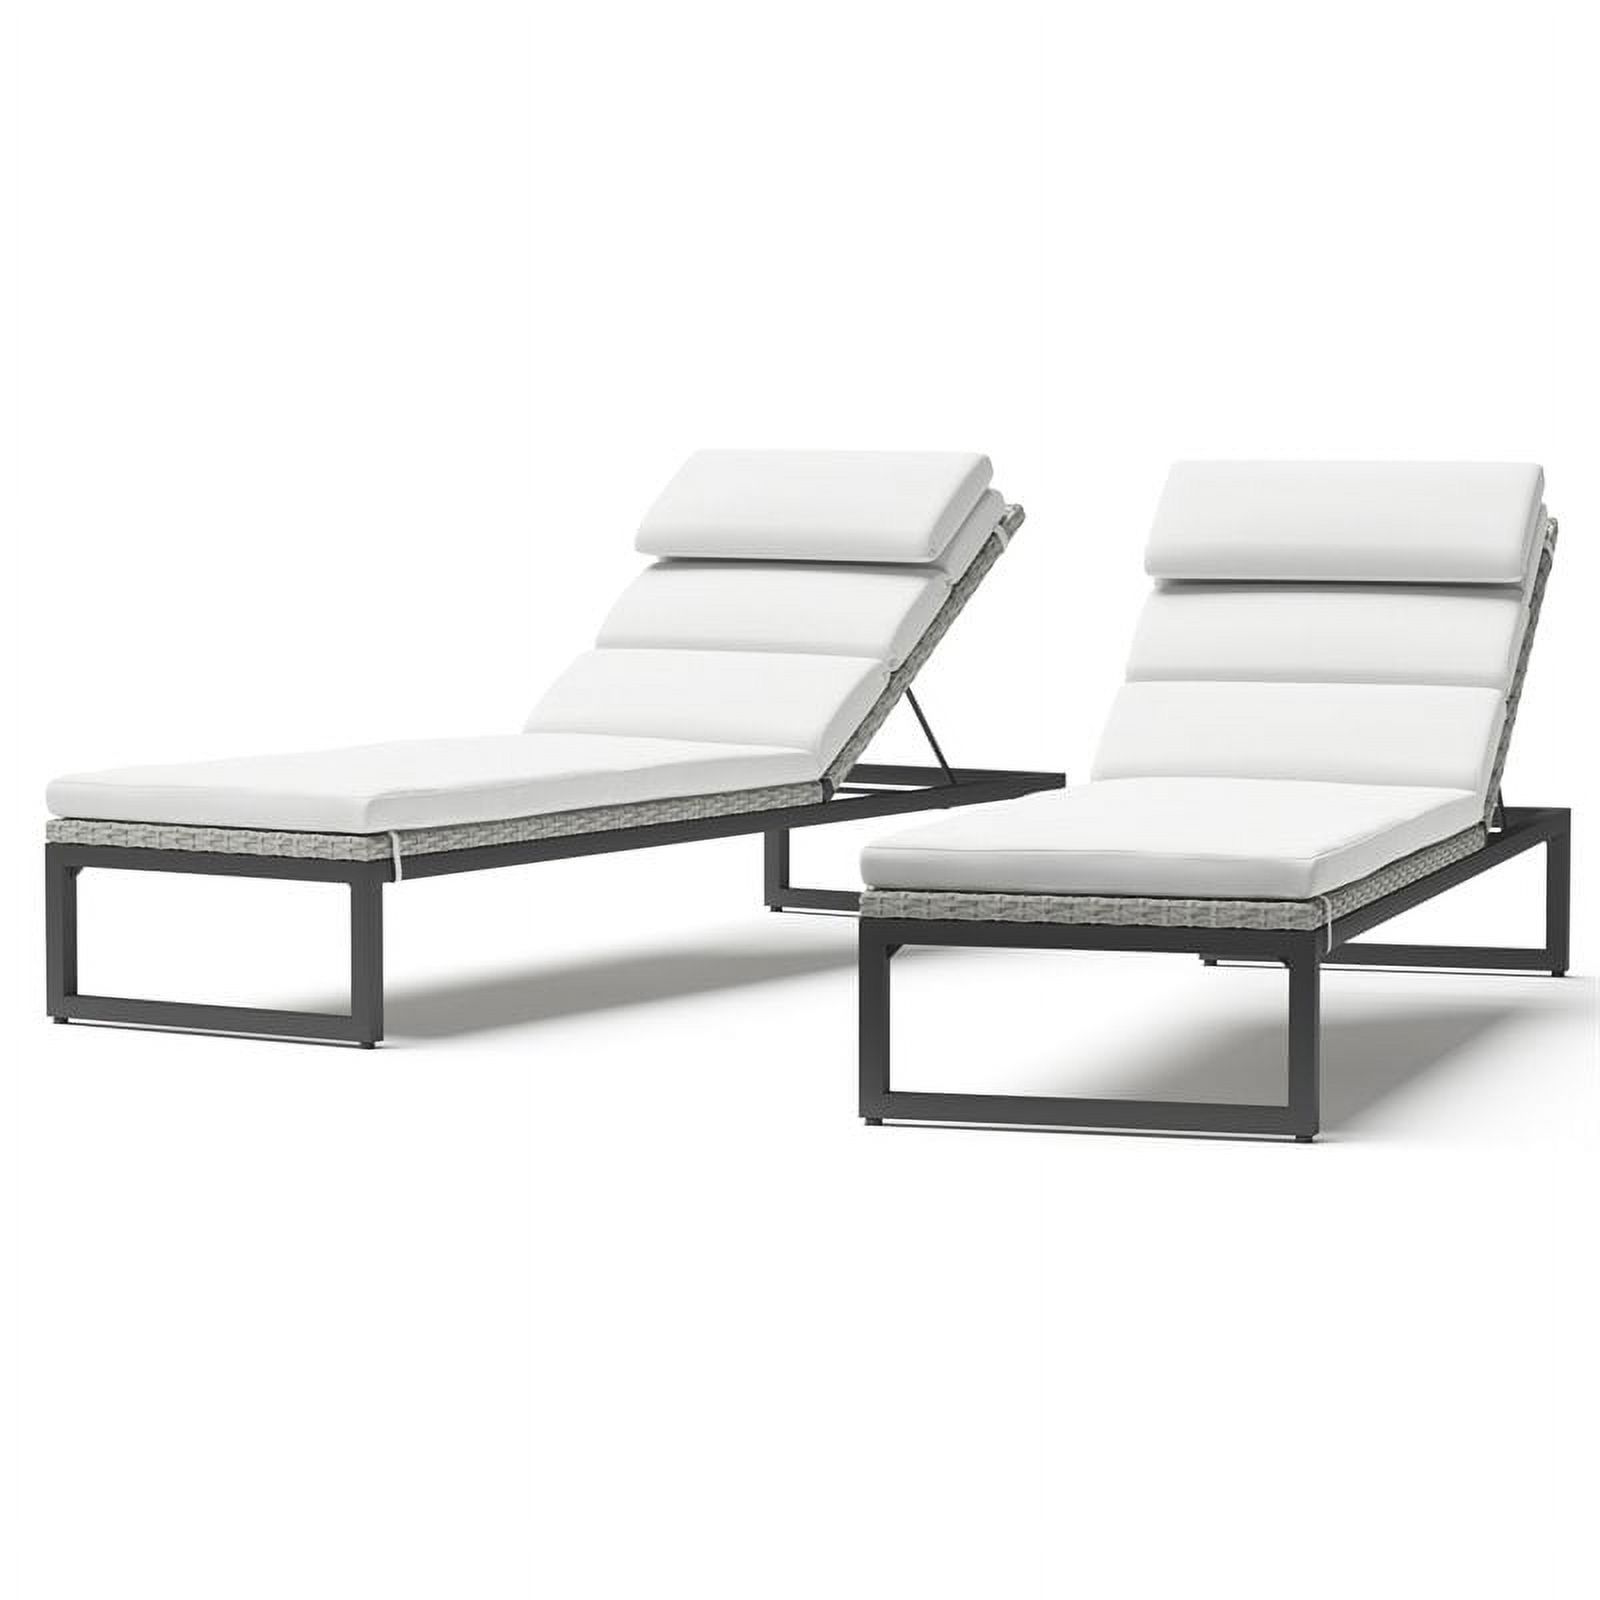 RST Brands Milo Chaise Lounges w/ Cushions in White/Gray (Set of 2) - image 1 of 6